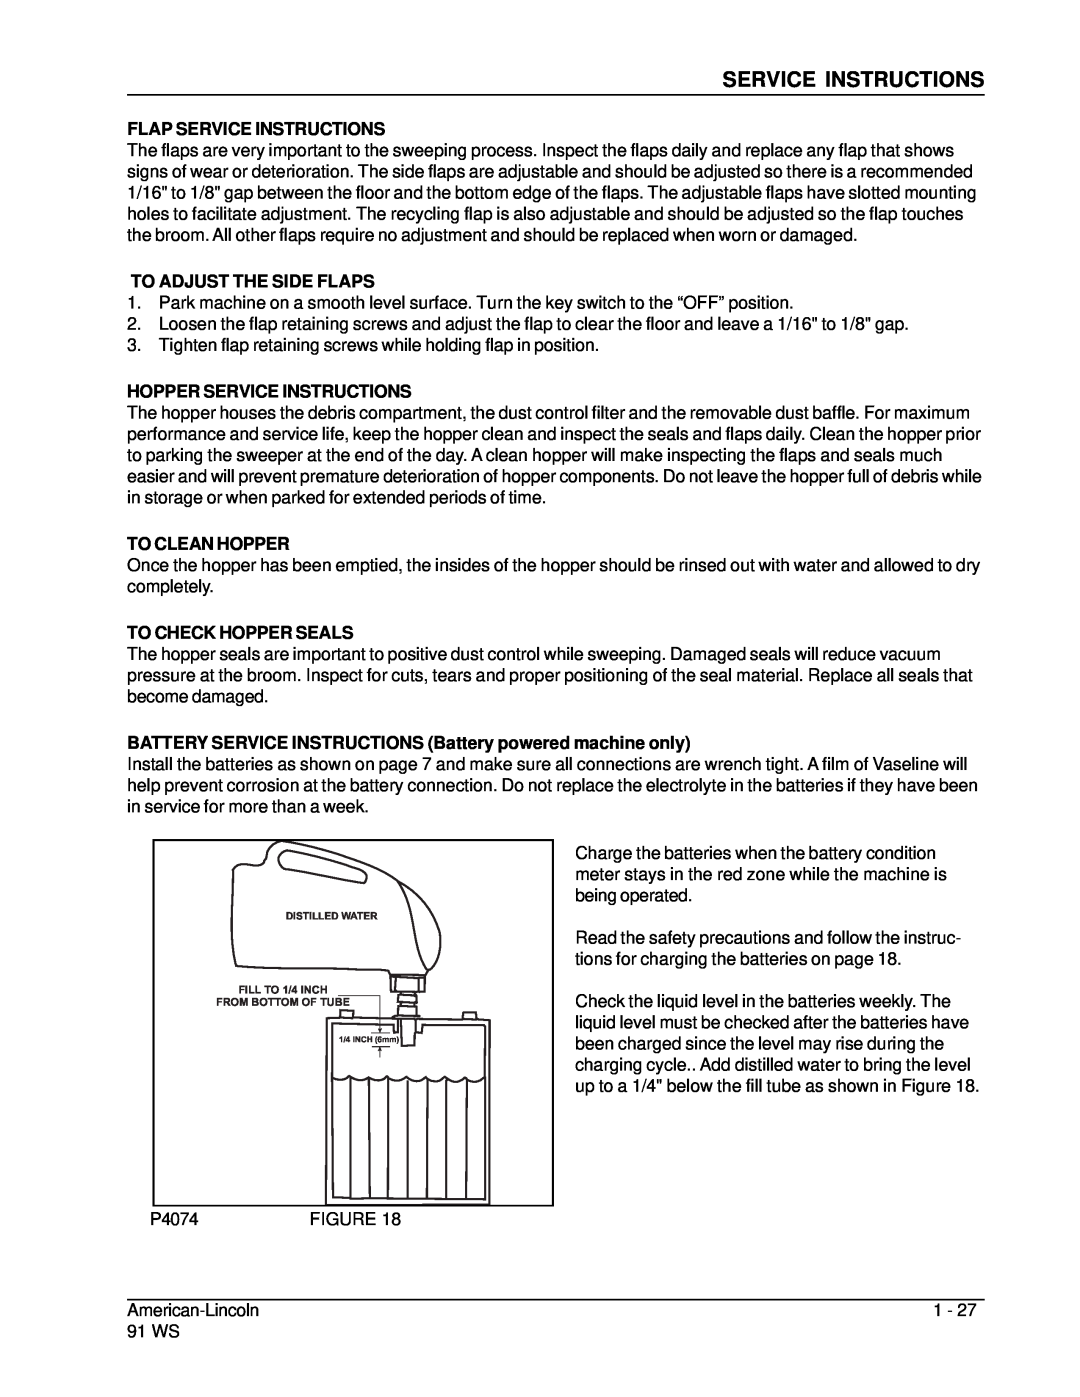 Nilfisk-ALTO 91WS Flap Service Instructions, To Adjust The Side Flaps, Hopper Service Instructions, To Clean Hopper 